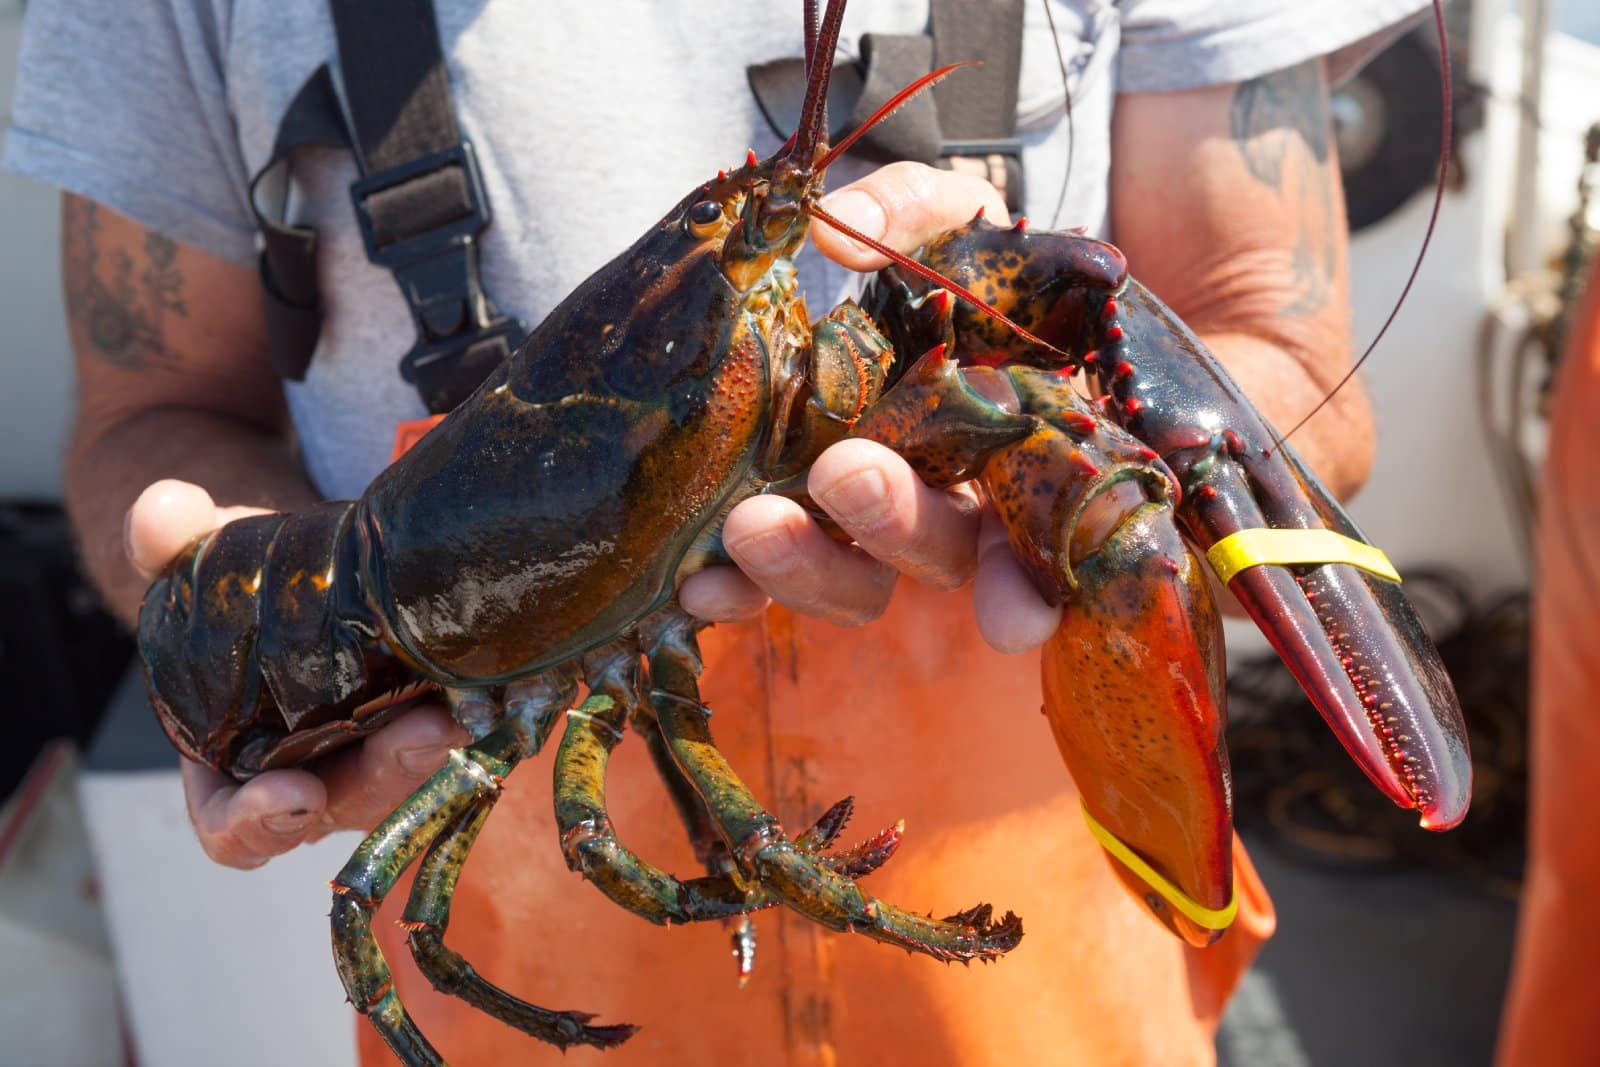 <p class="wp-caption-text">Image Credit: Shutterstock / spwidoff</p>  <p>Join a lobster boat tour for a hands-on experience of Maine’s most famous industry. Learn, lobster, and laugh your way through this unique activity that’s surprisingly affordable.</p>